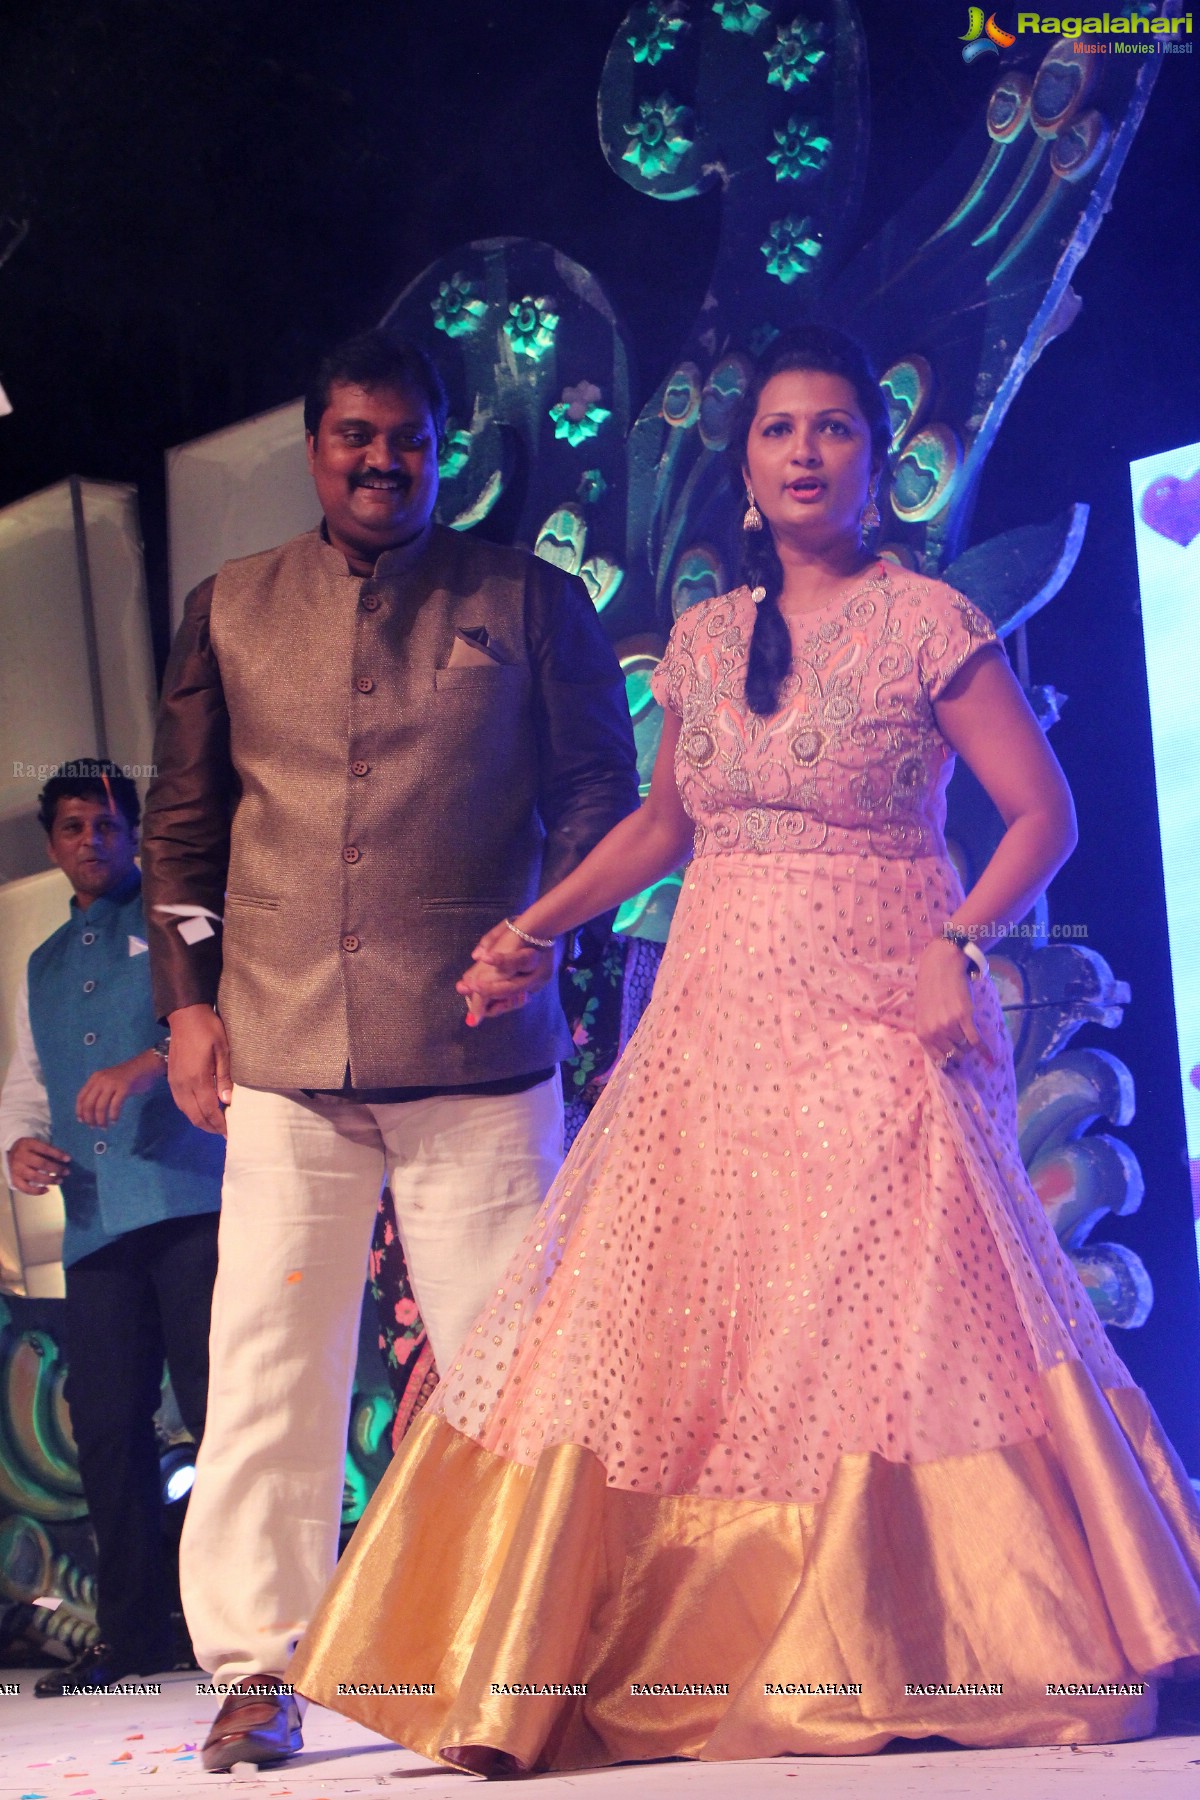 Sangeet Ceremony of Prateek and Preeti at N Convention, Hyderabad